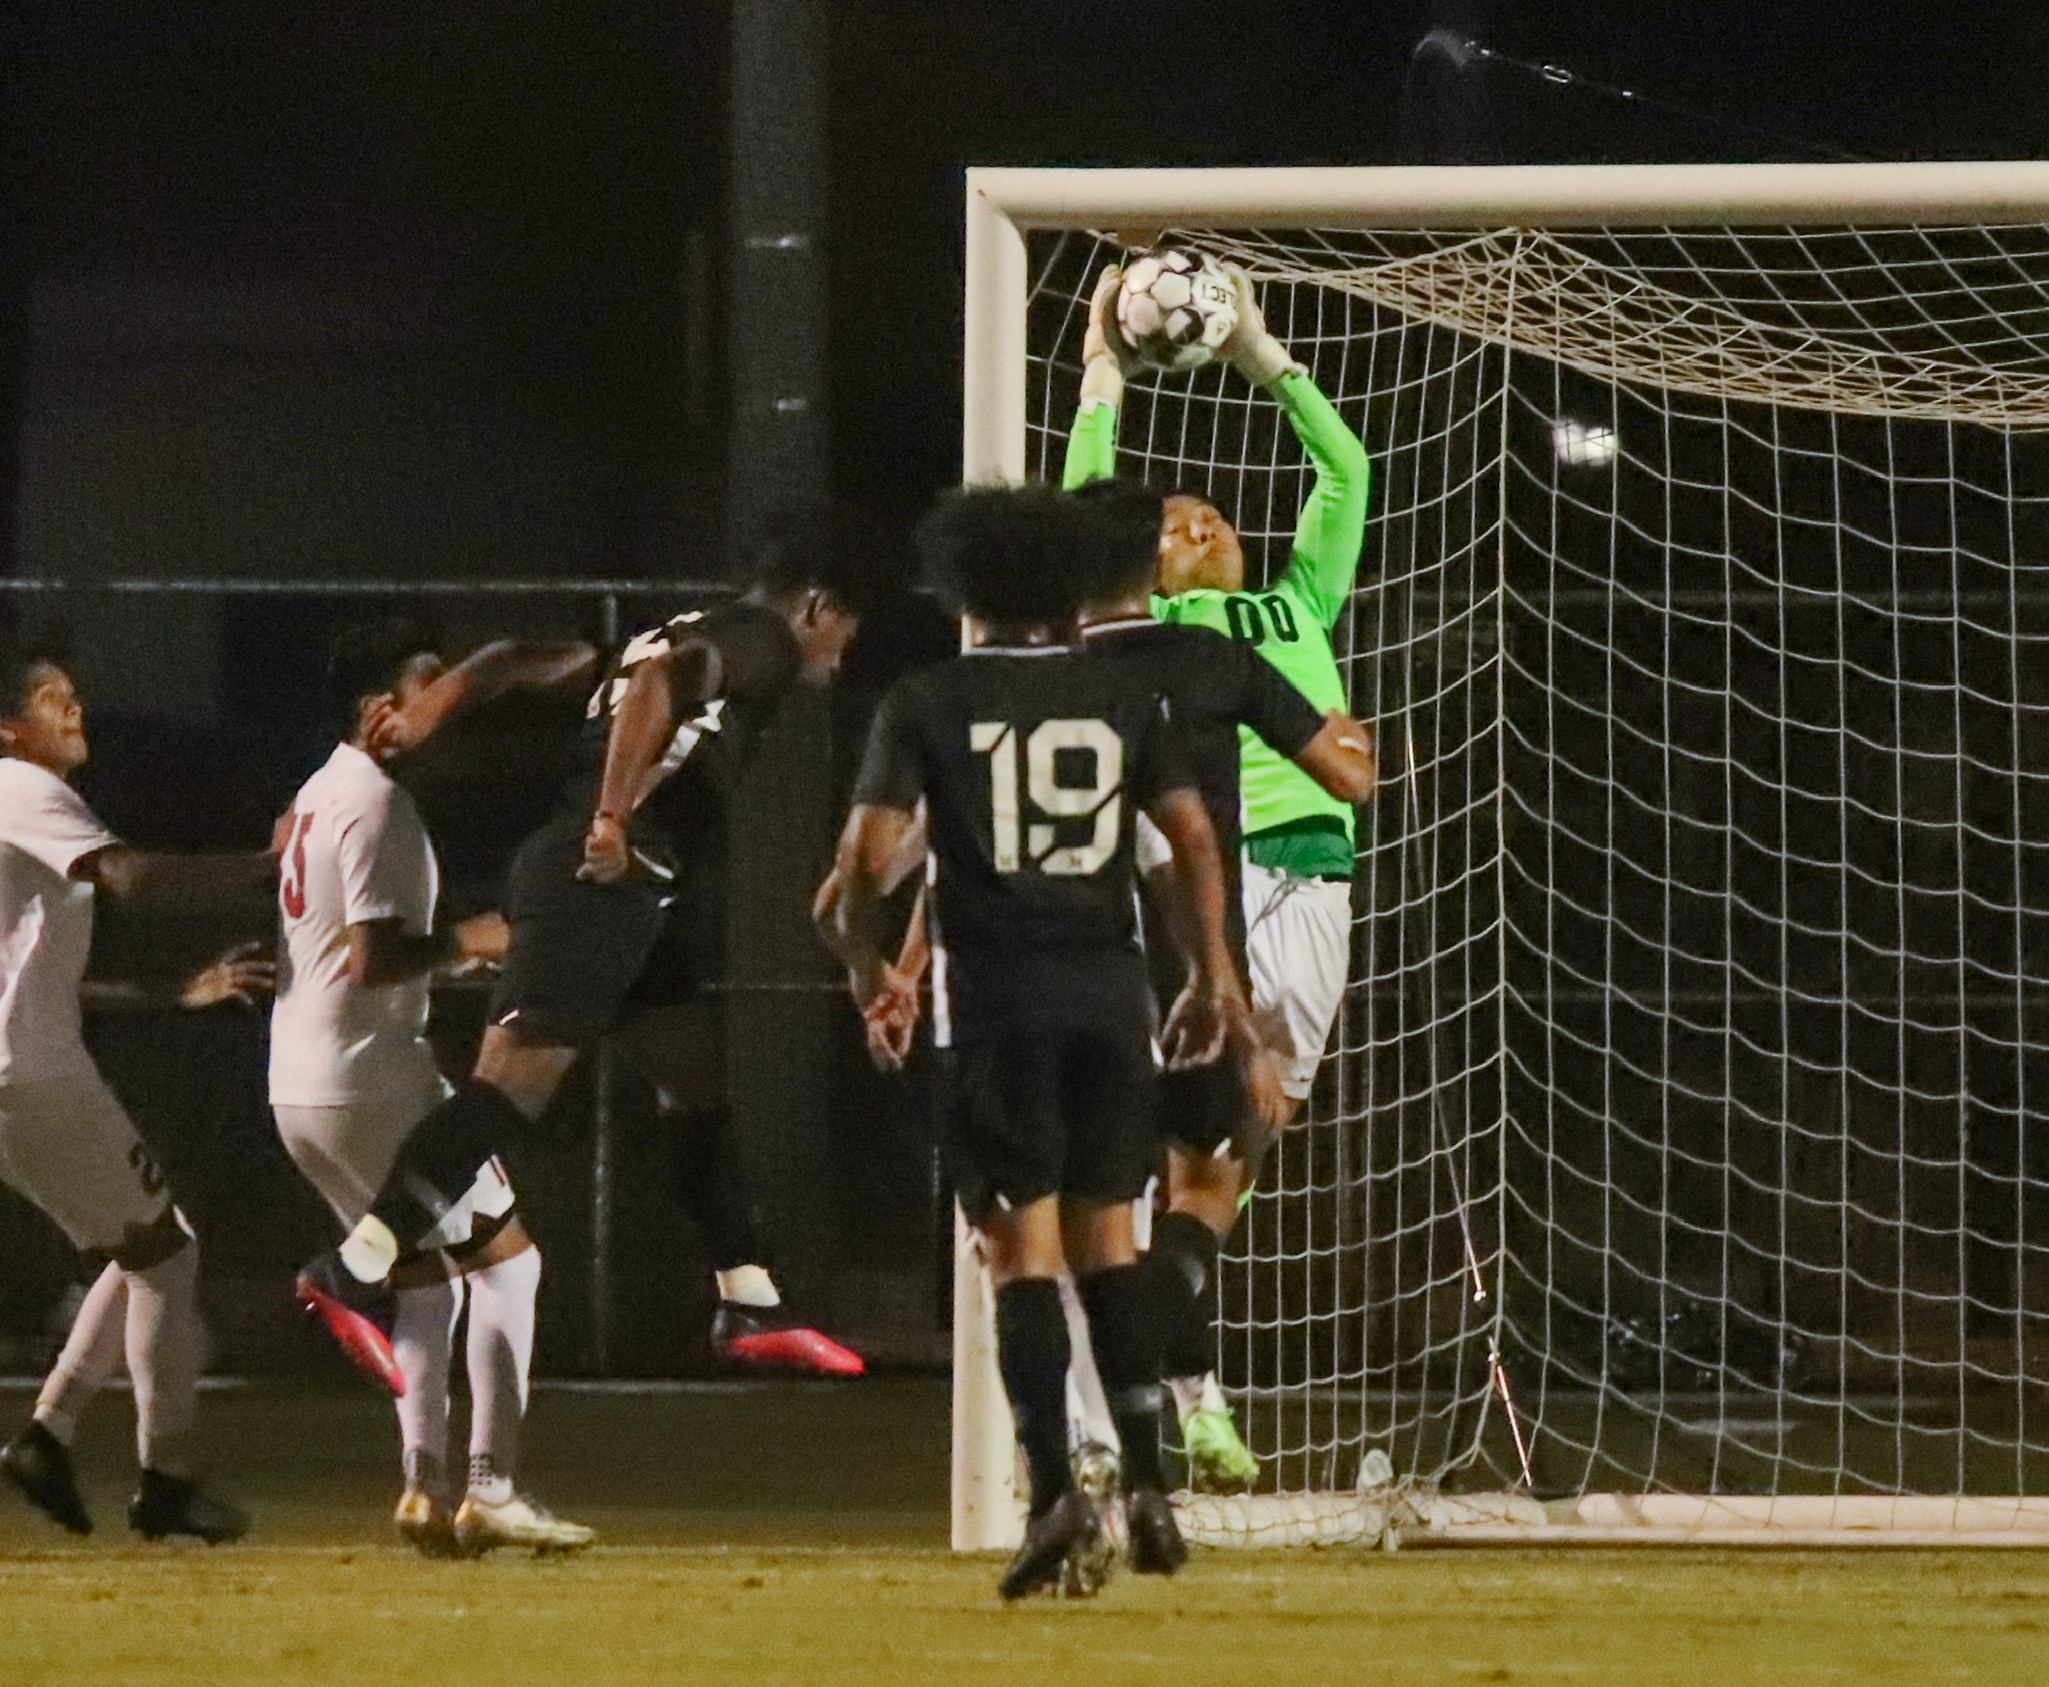 Paul Jing with the leaping grab during PCC's 0-0 tie Friday night at Mt. San Antonio College (photo by Michael Watkins).